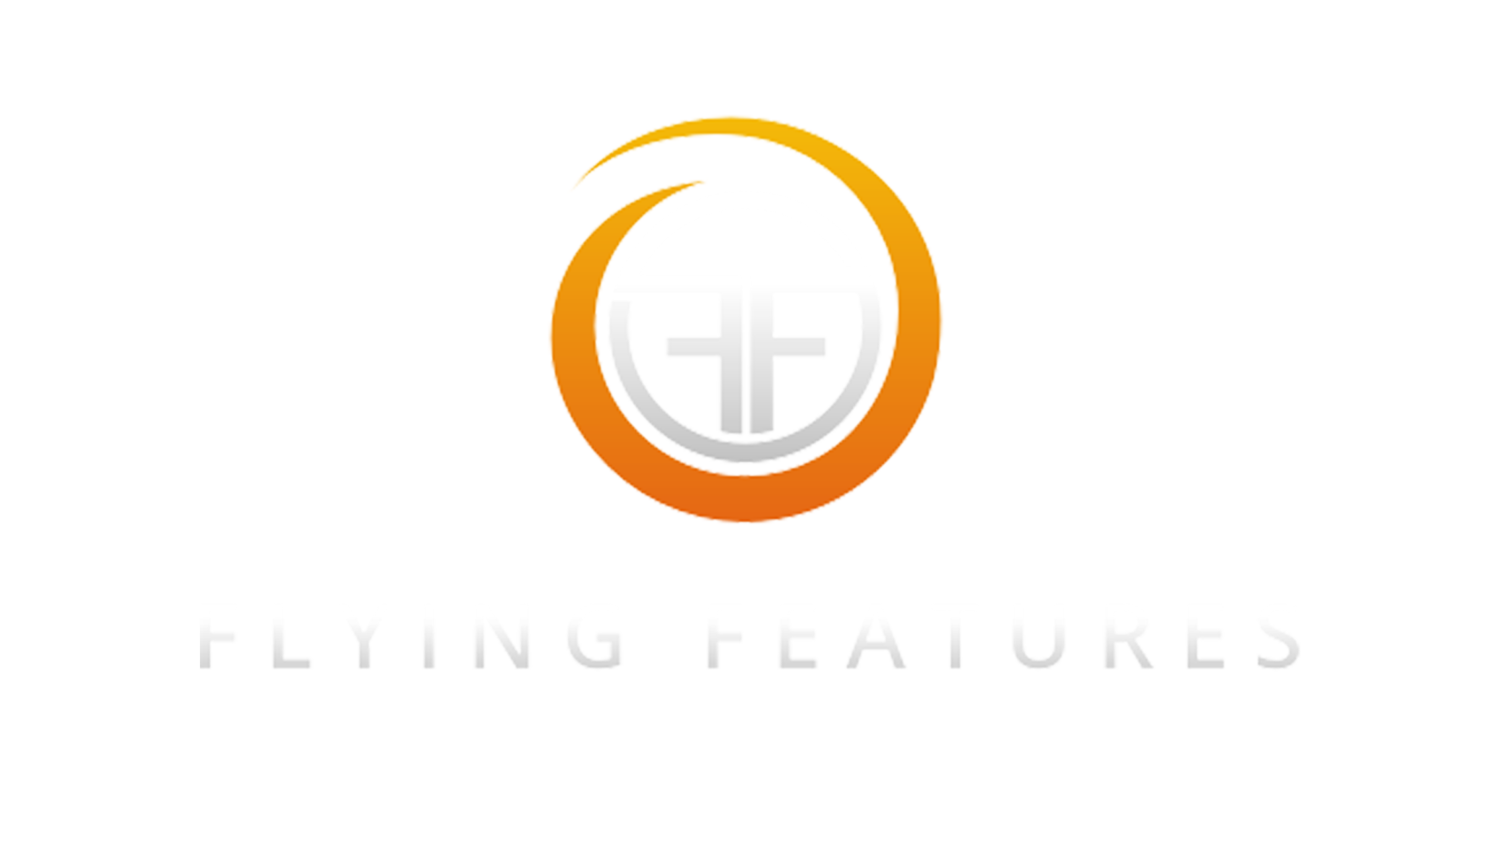 FLYING FEATURES